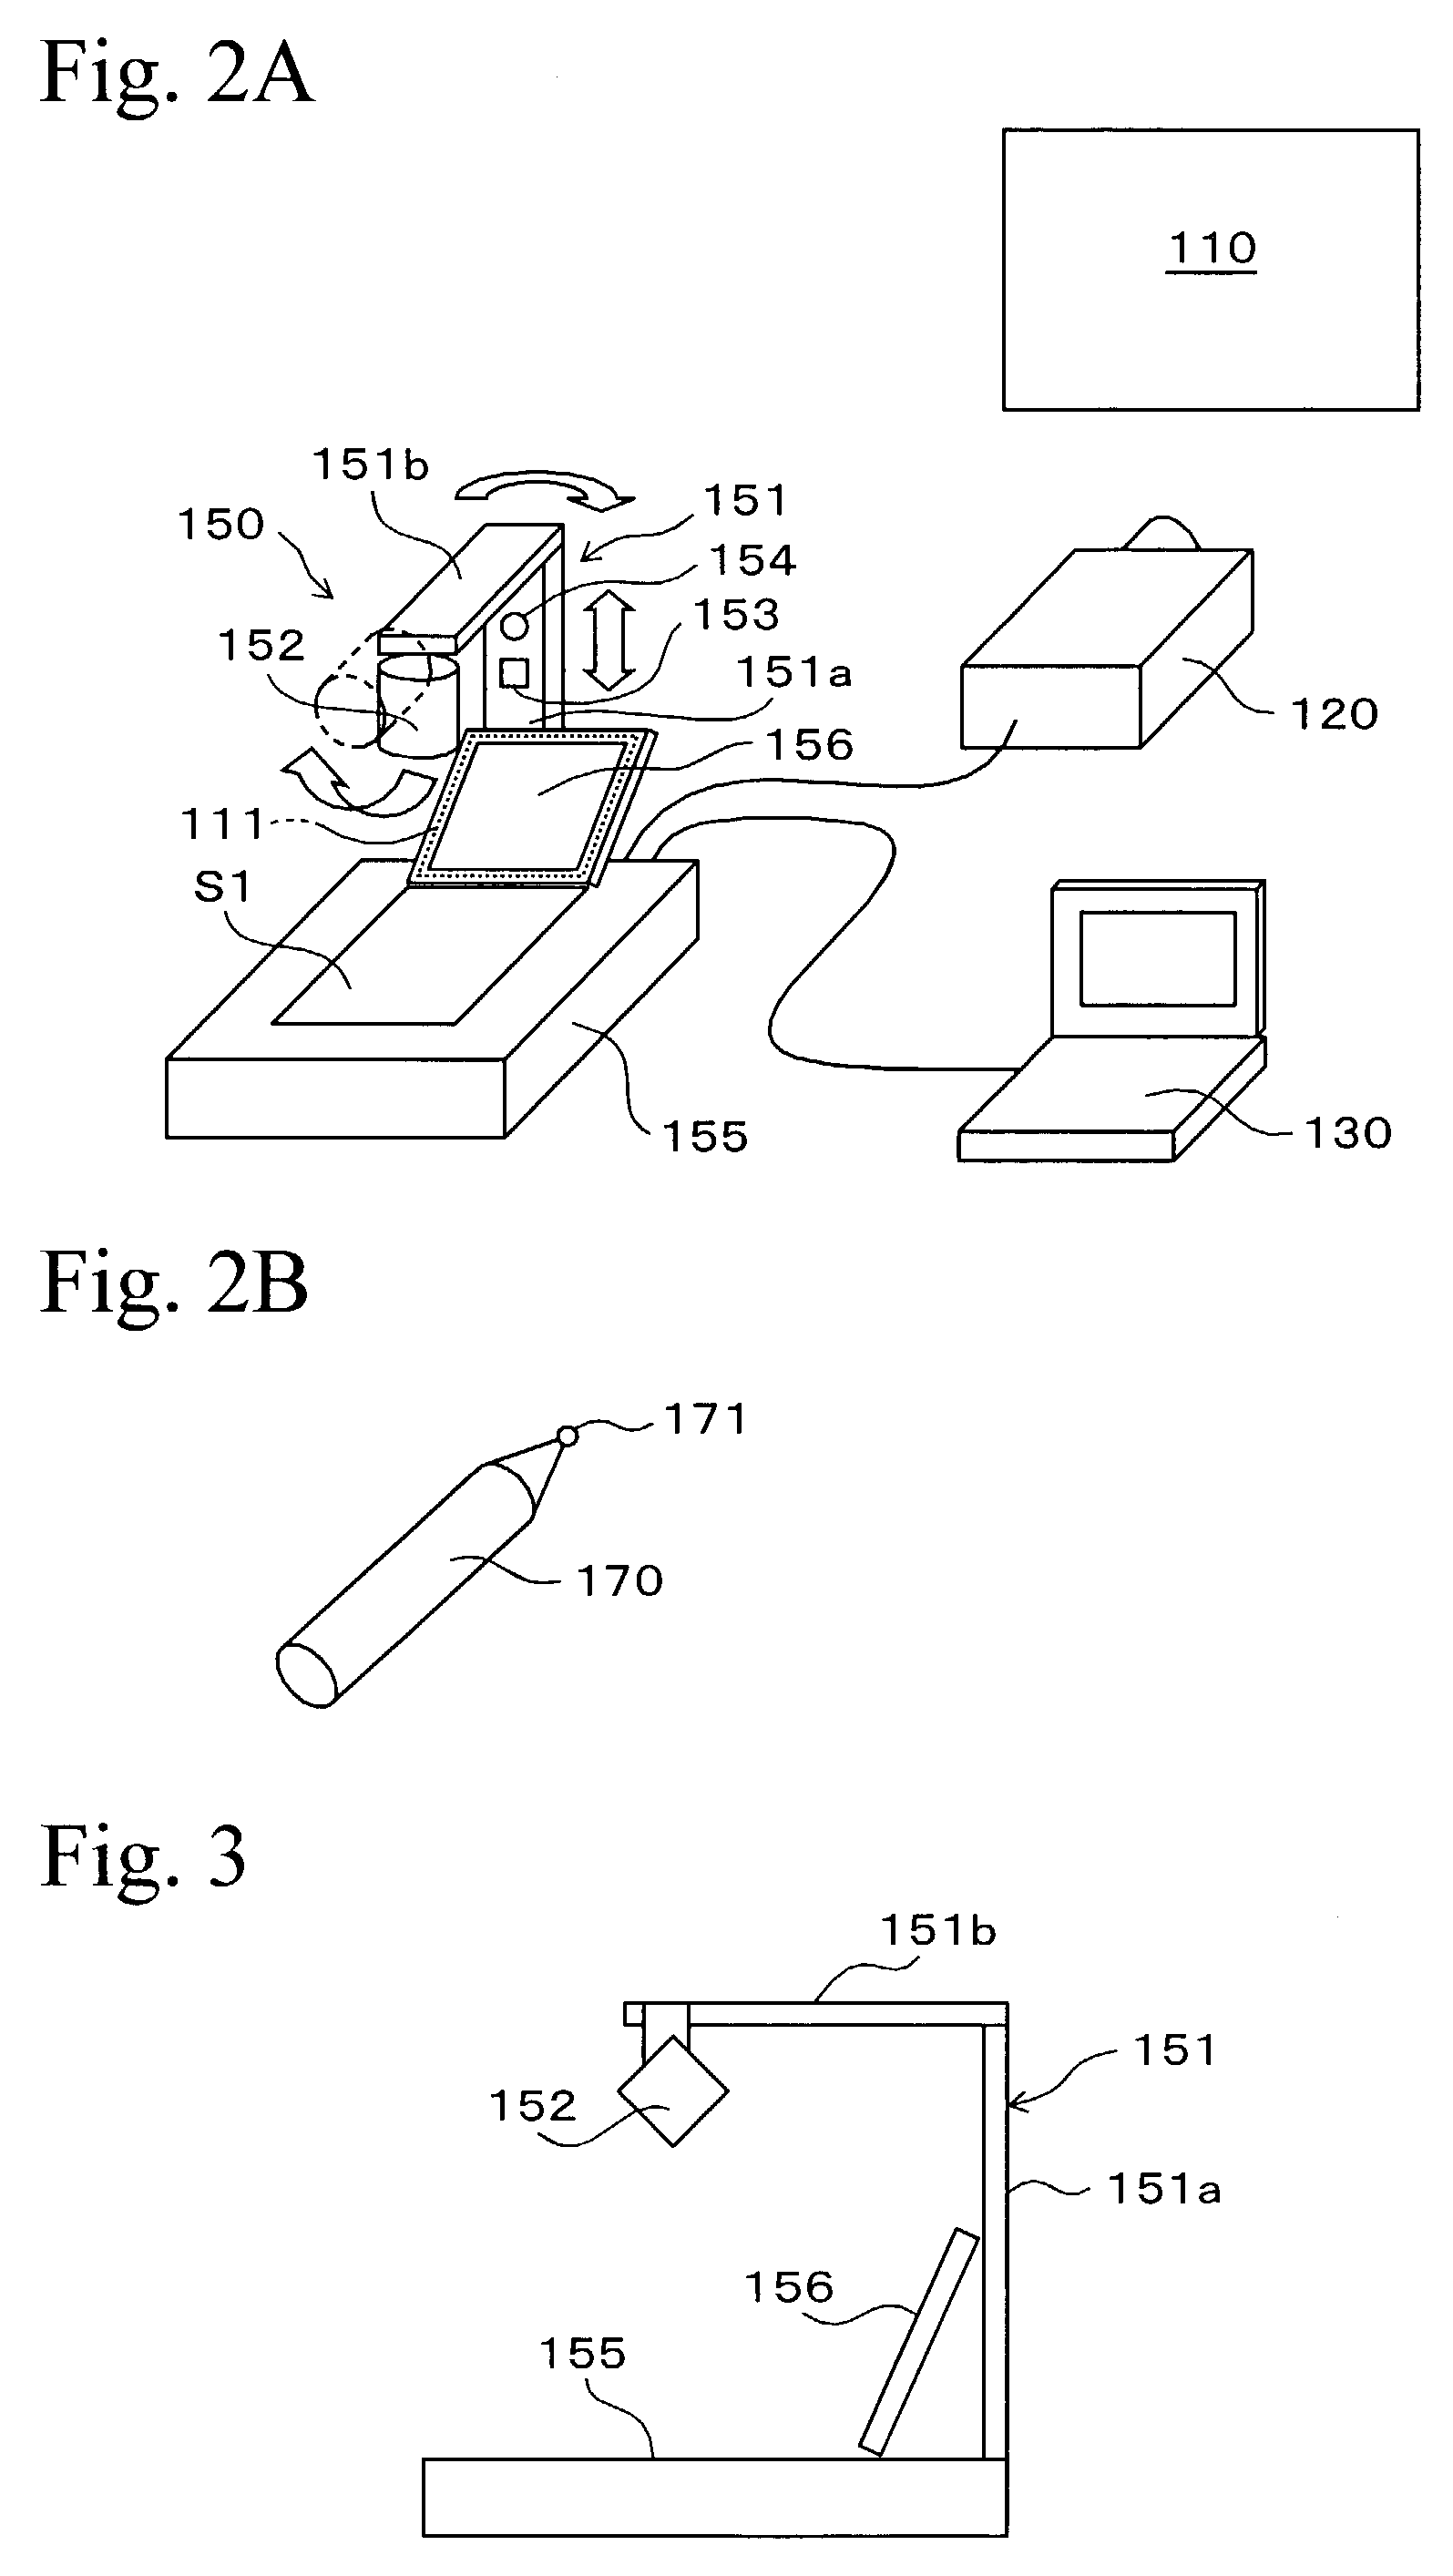 Presentation system, material presenting device, and photographing device for presentation